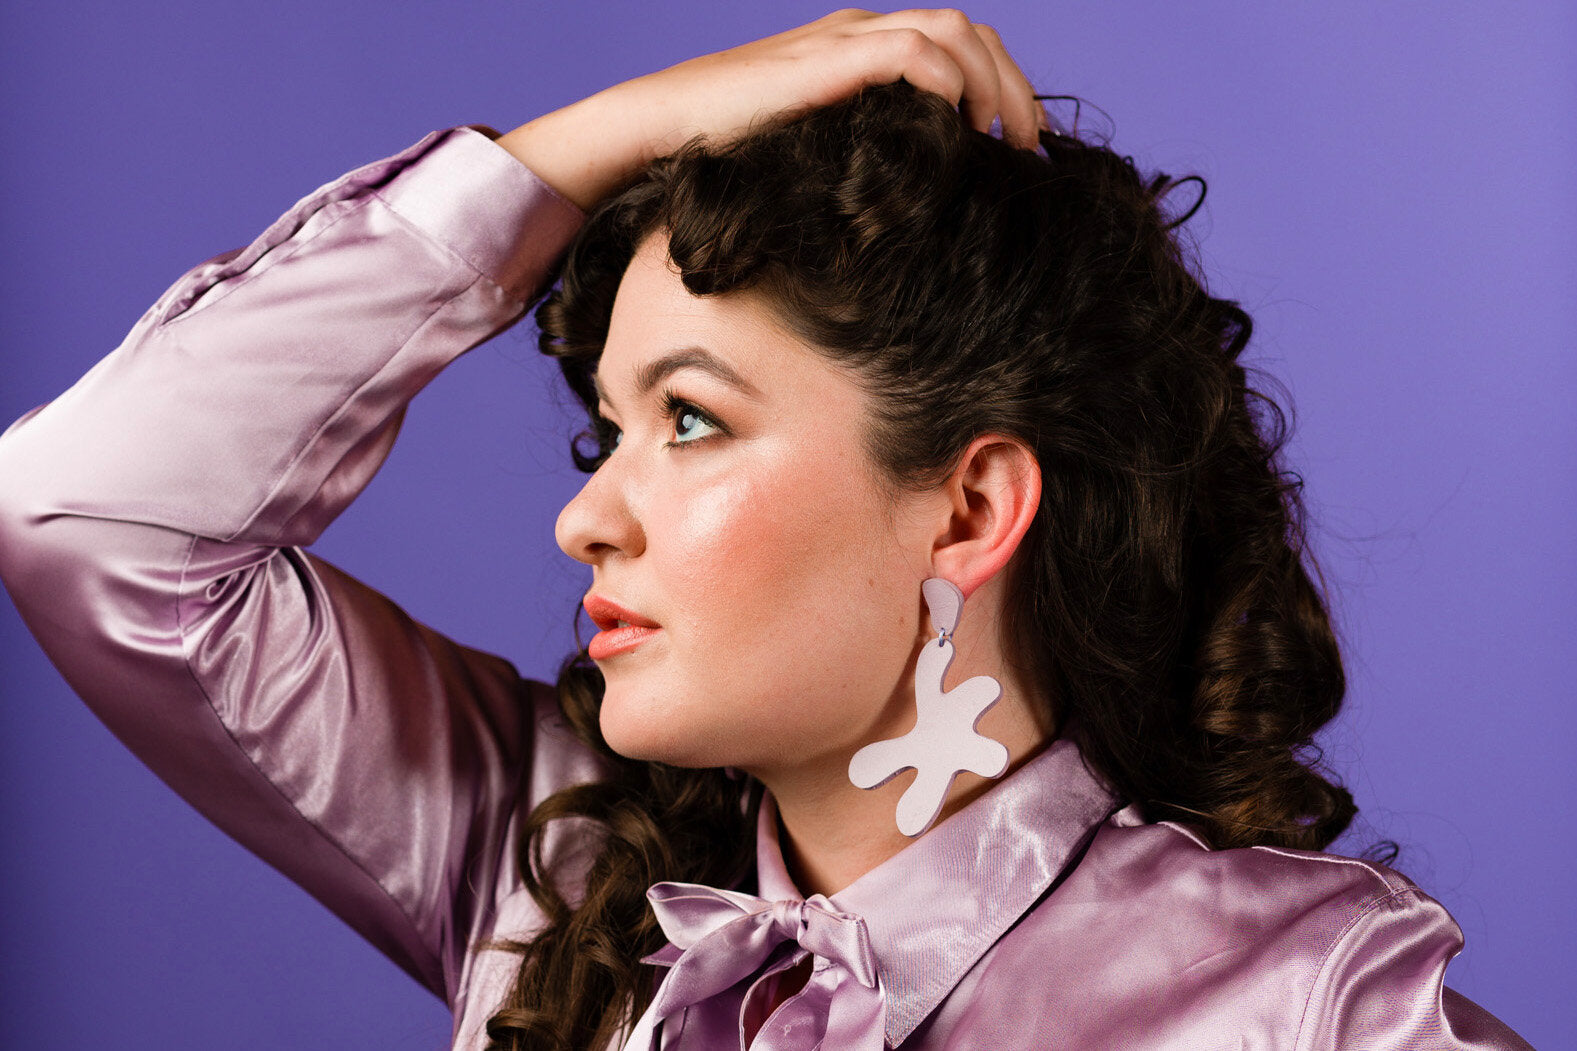 a woman with dark curly hair and dewy makeup wears a shiny lavender blouse and matching lavender leather earrings